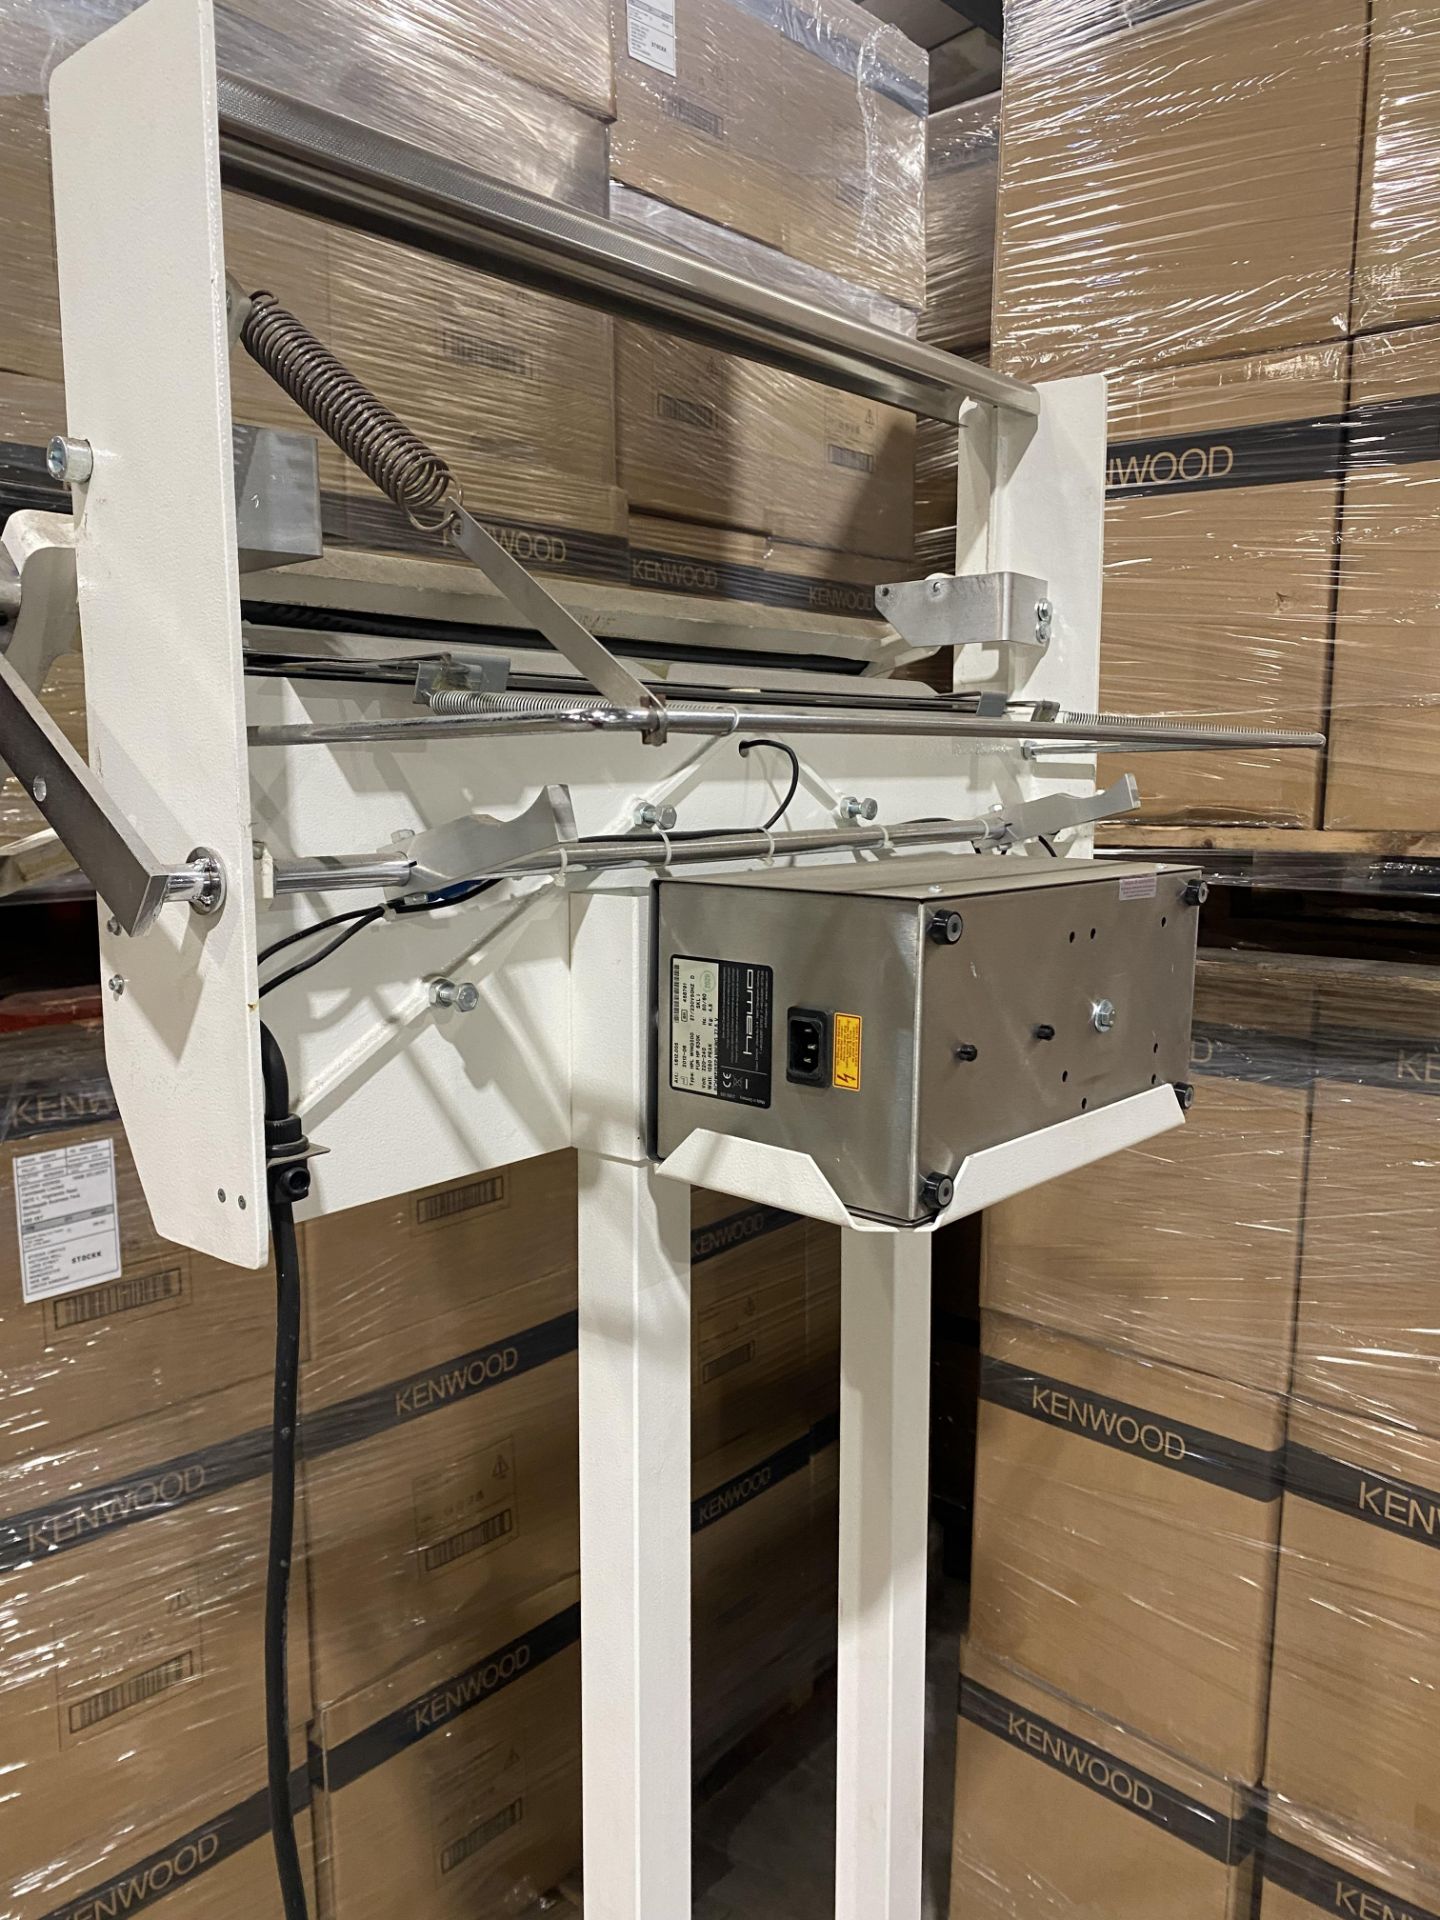 Hawo HP 630 K Polybagger Wrapping / Packaging Machine - Image 9 of 11